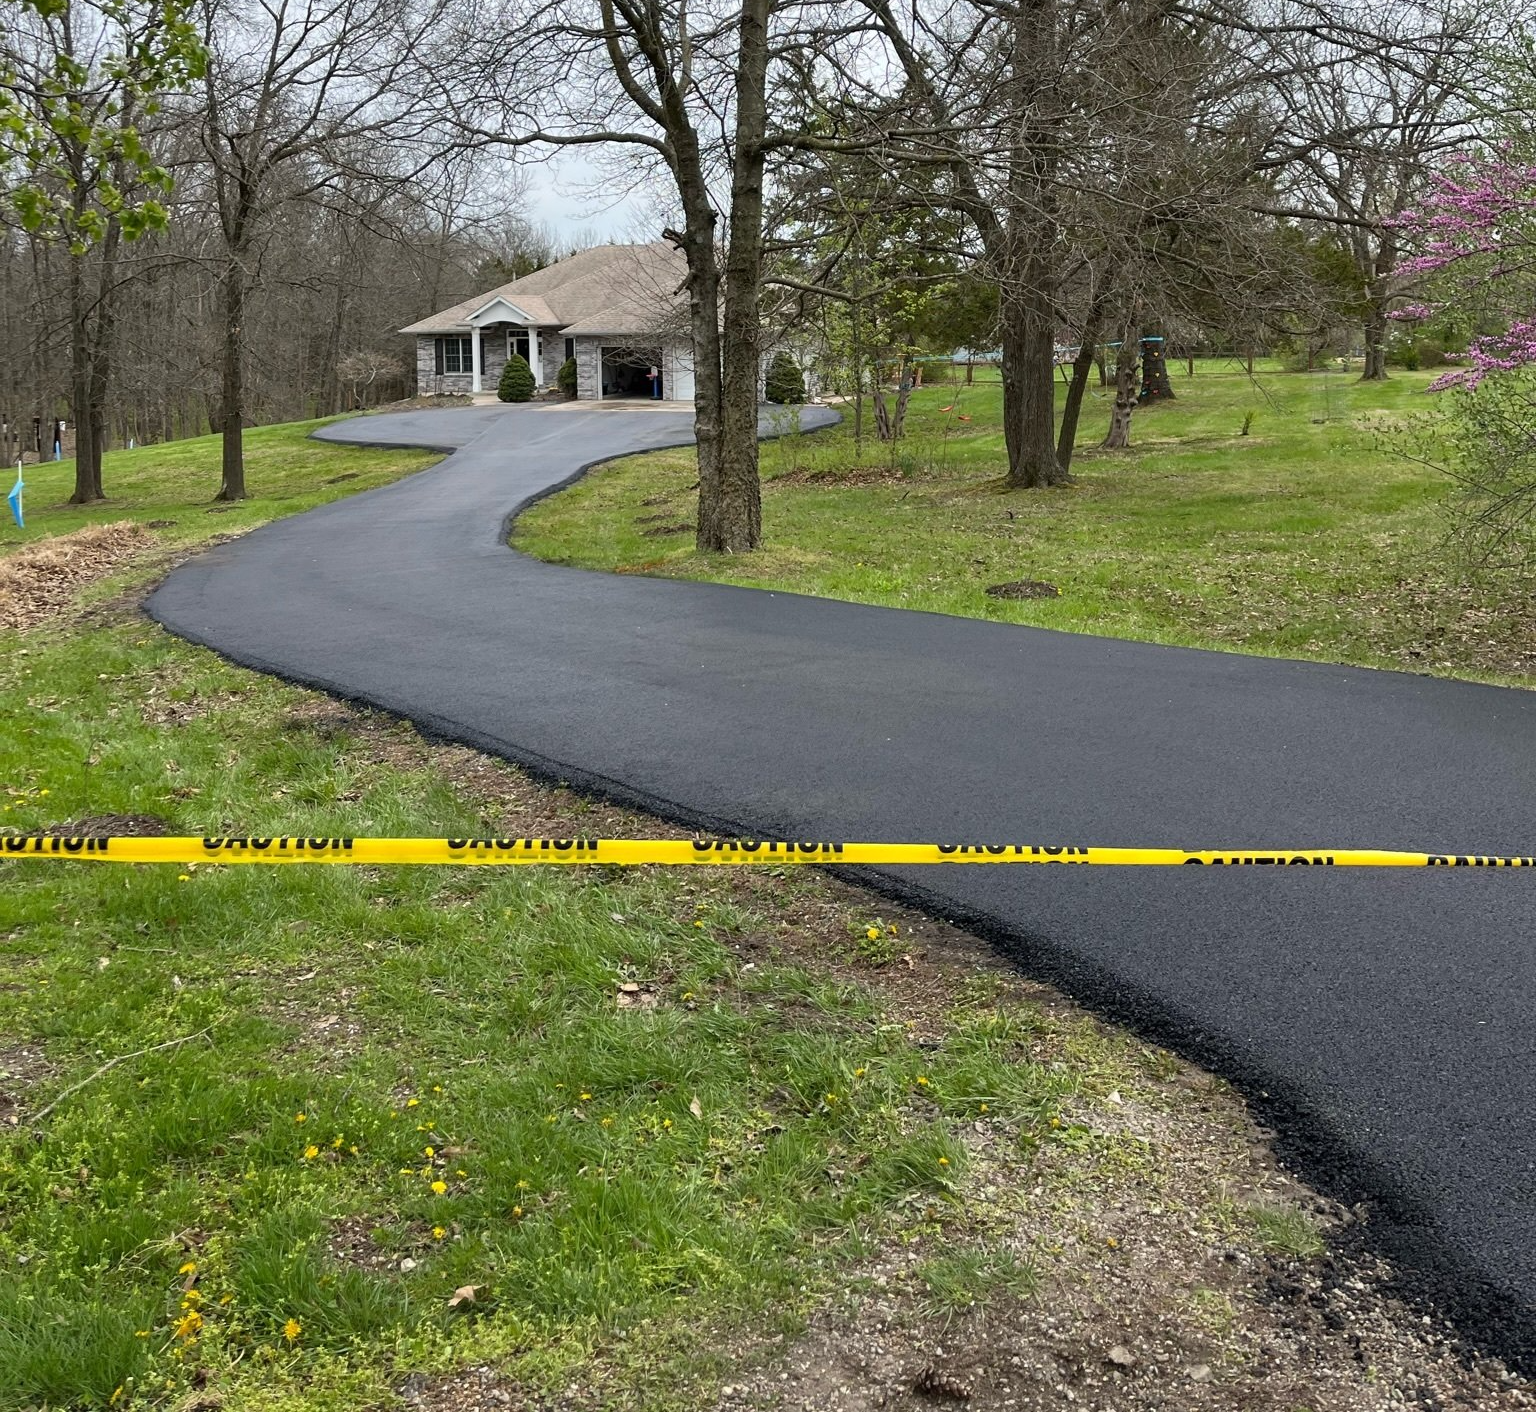 Don’t let an ugly driveway impact your home’s curb appeal. Get started with MoSEAL today!